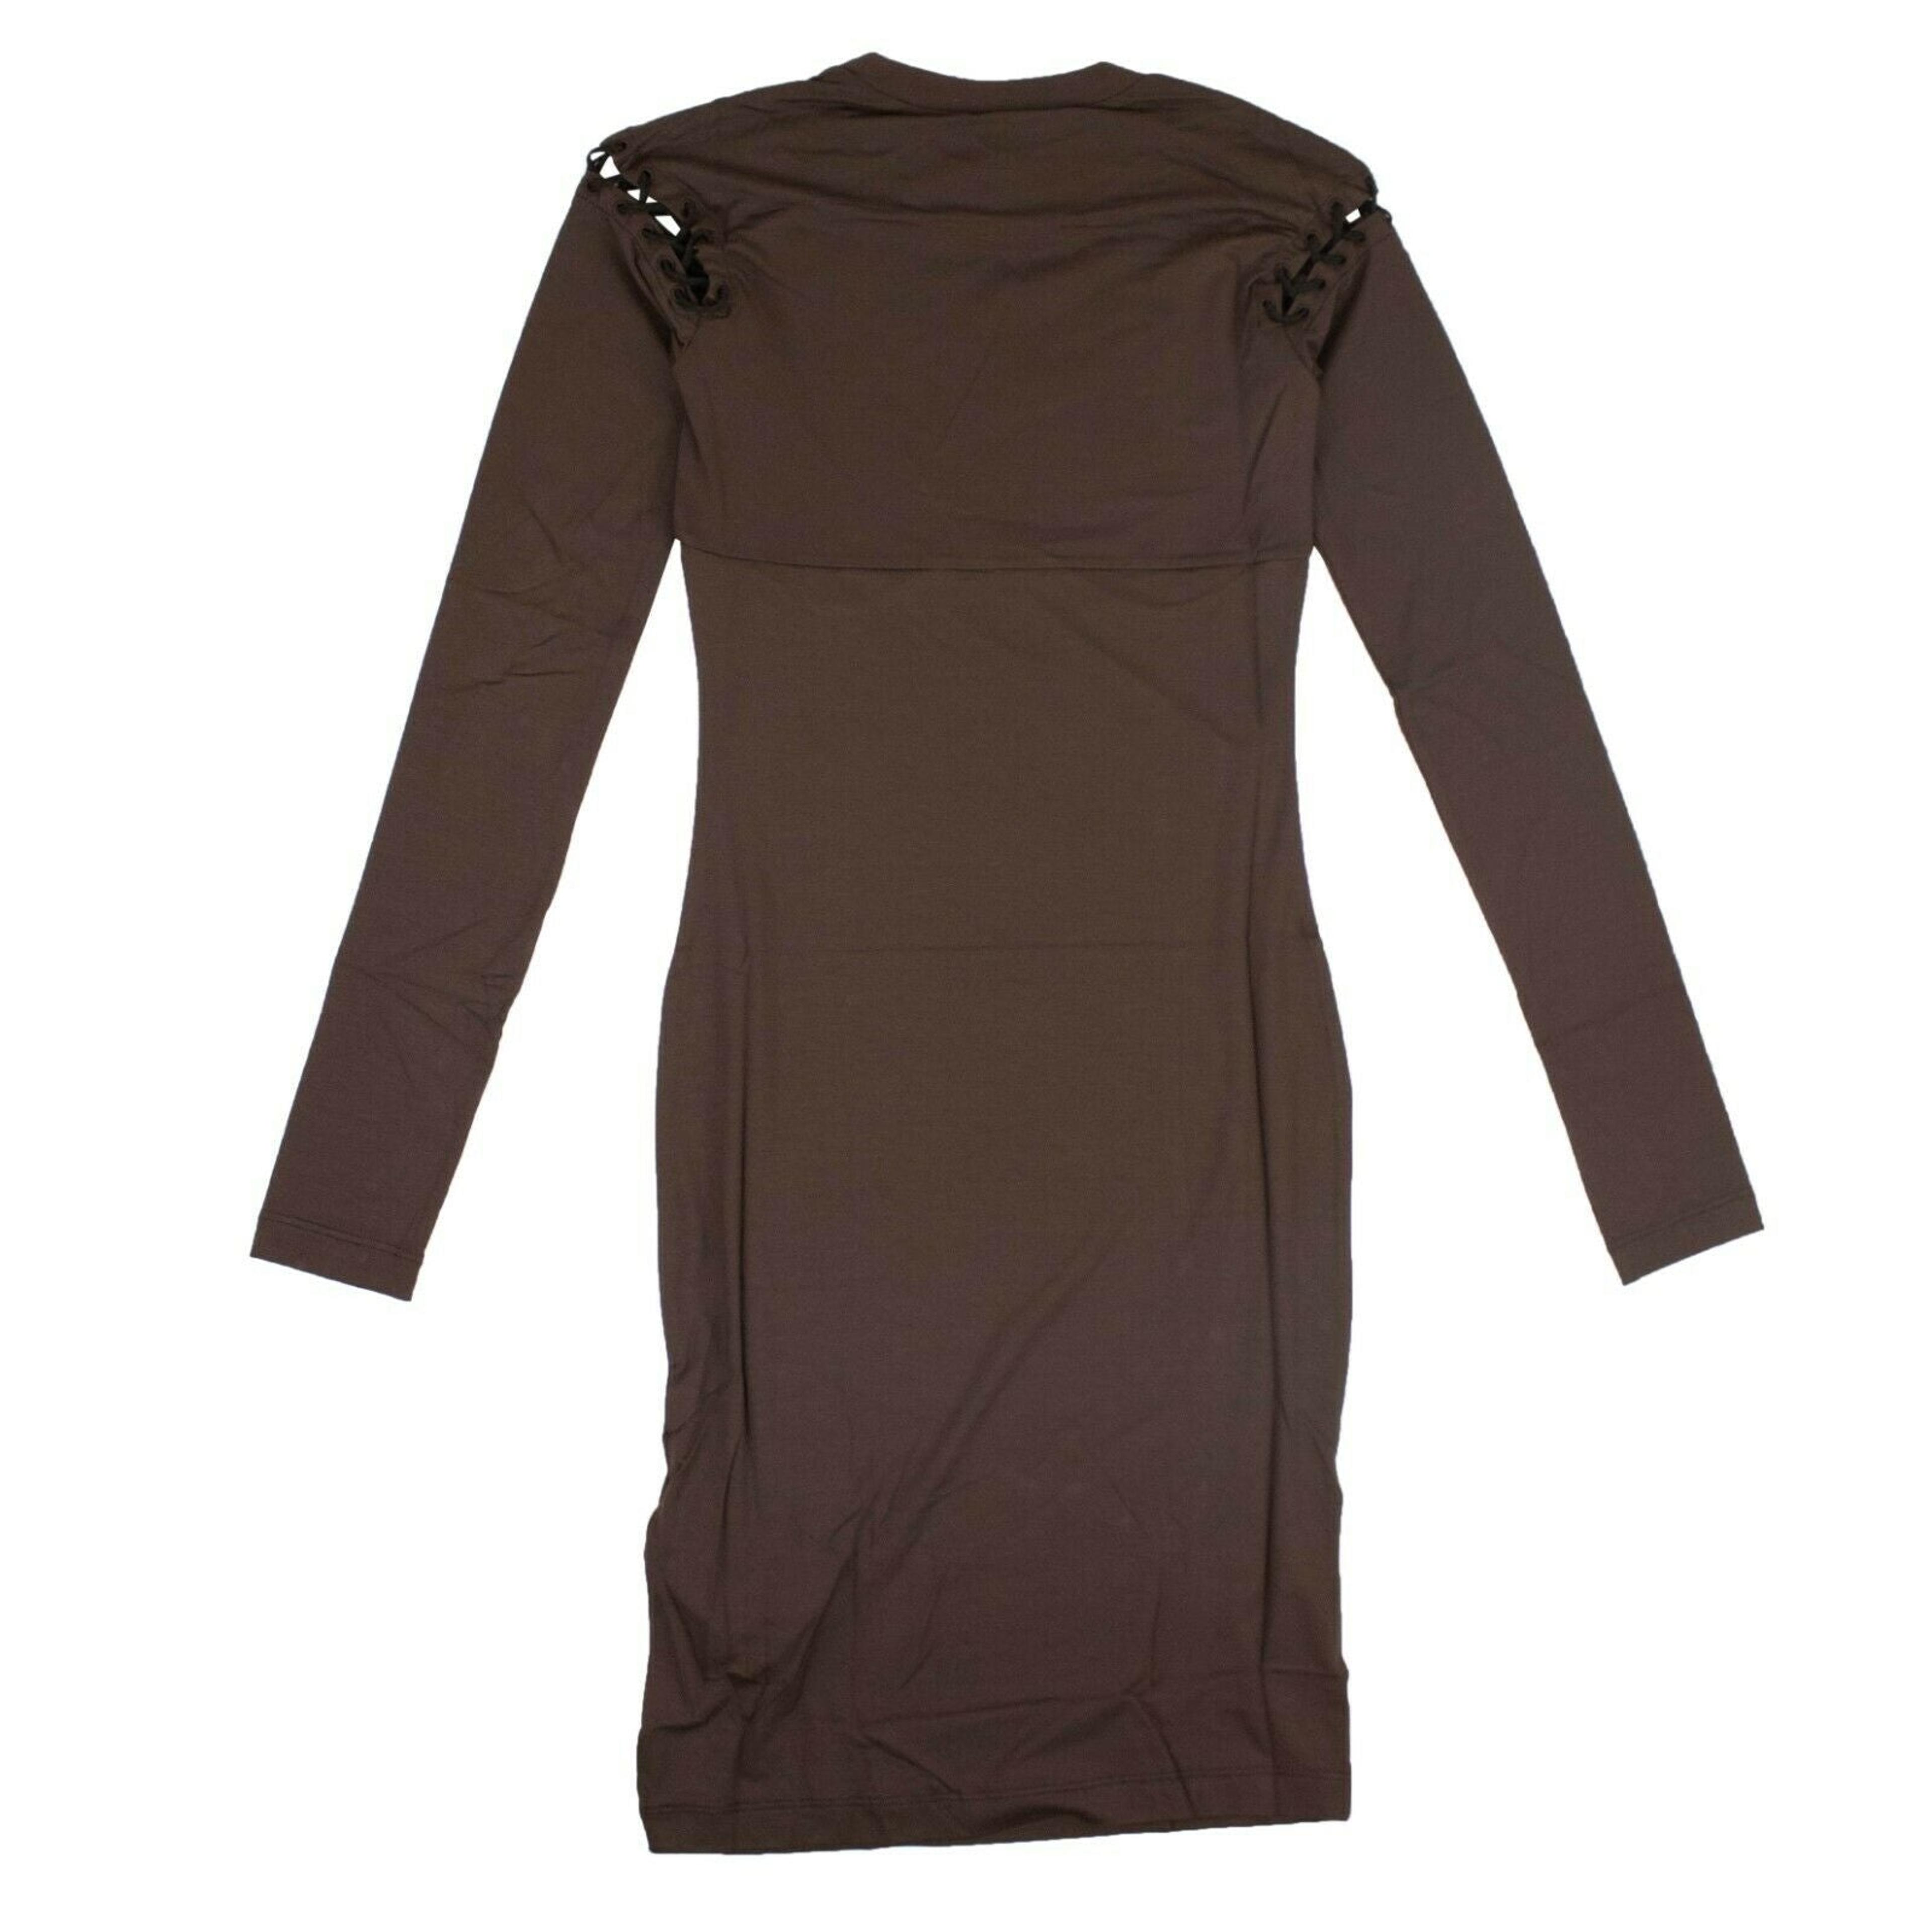 Alternate View 1 of Brown Lace Up Bodycon Dress